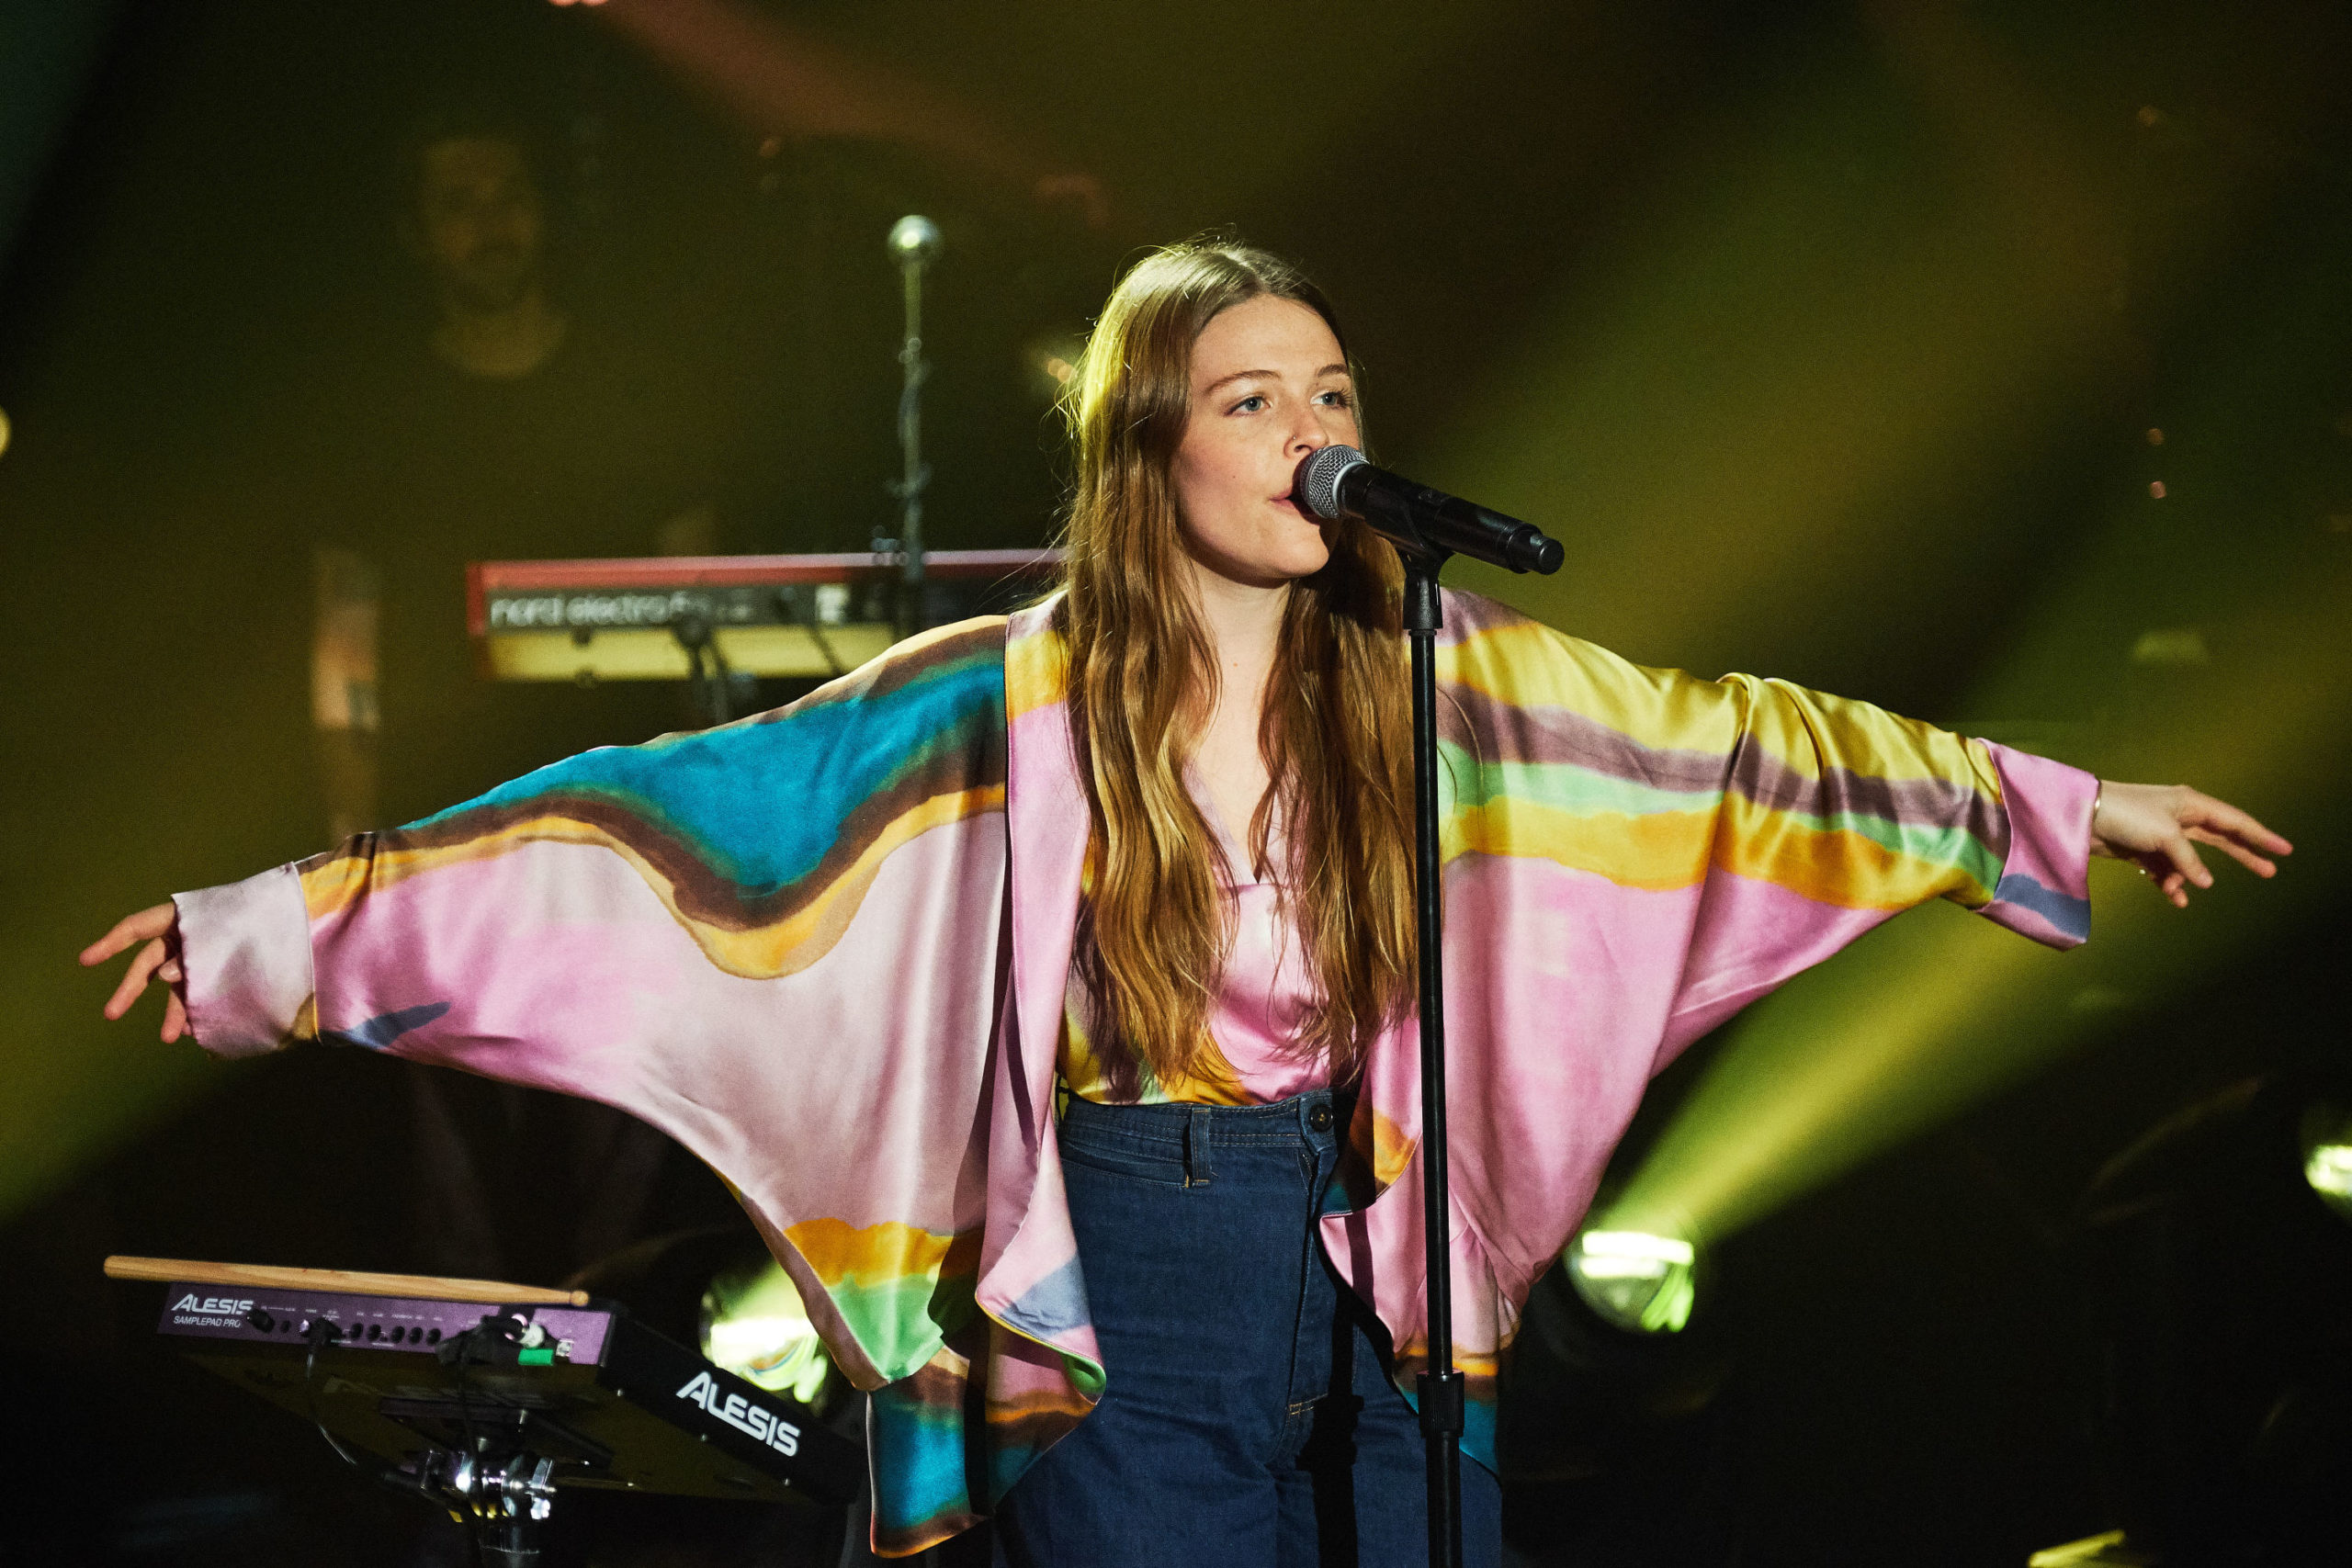 A new Maggie Rogers era is upon us. The 